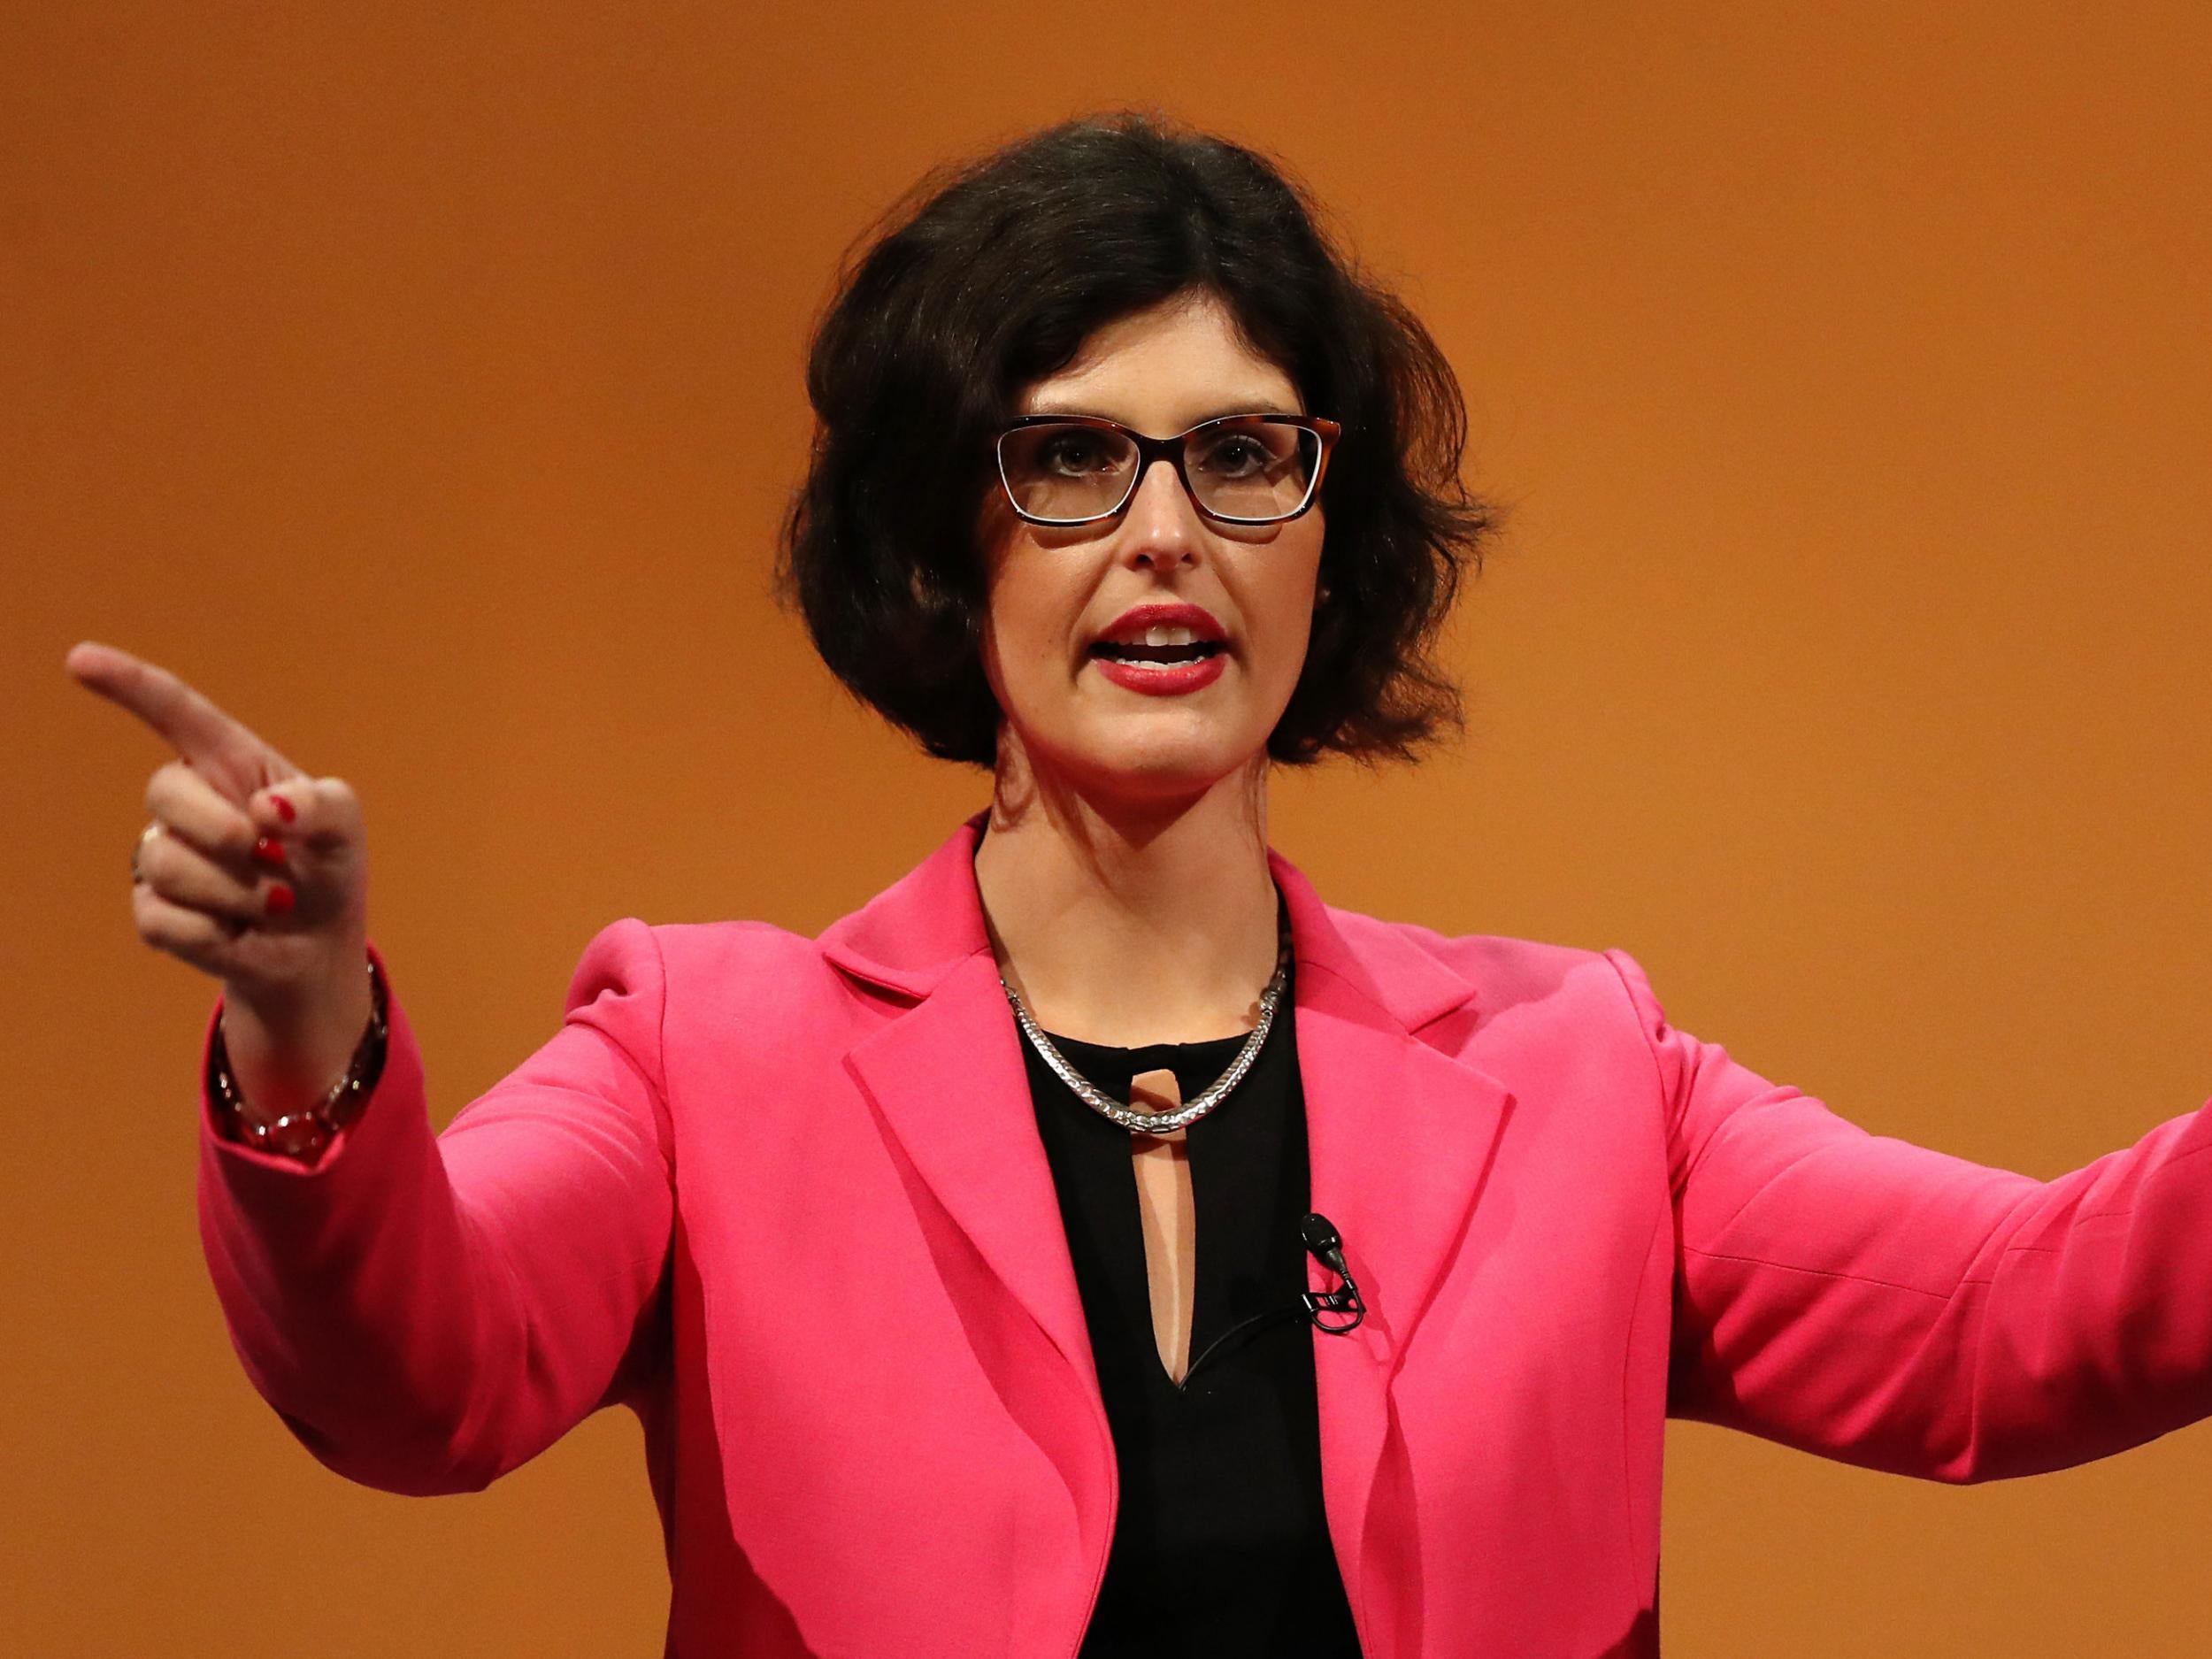 &apos;Gove is the worst thing ever to happen to education&apos;: Rising Liberal Democrat star Layla Moran on the state of education, Brexit and her party